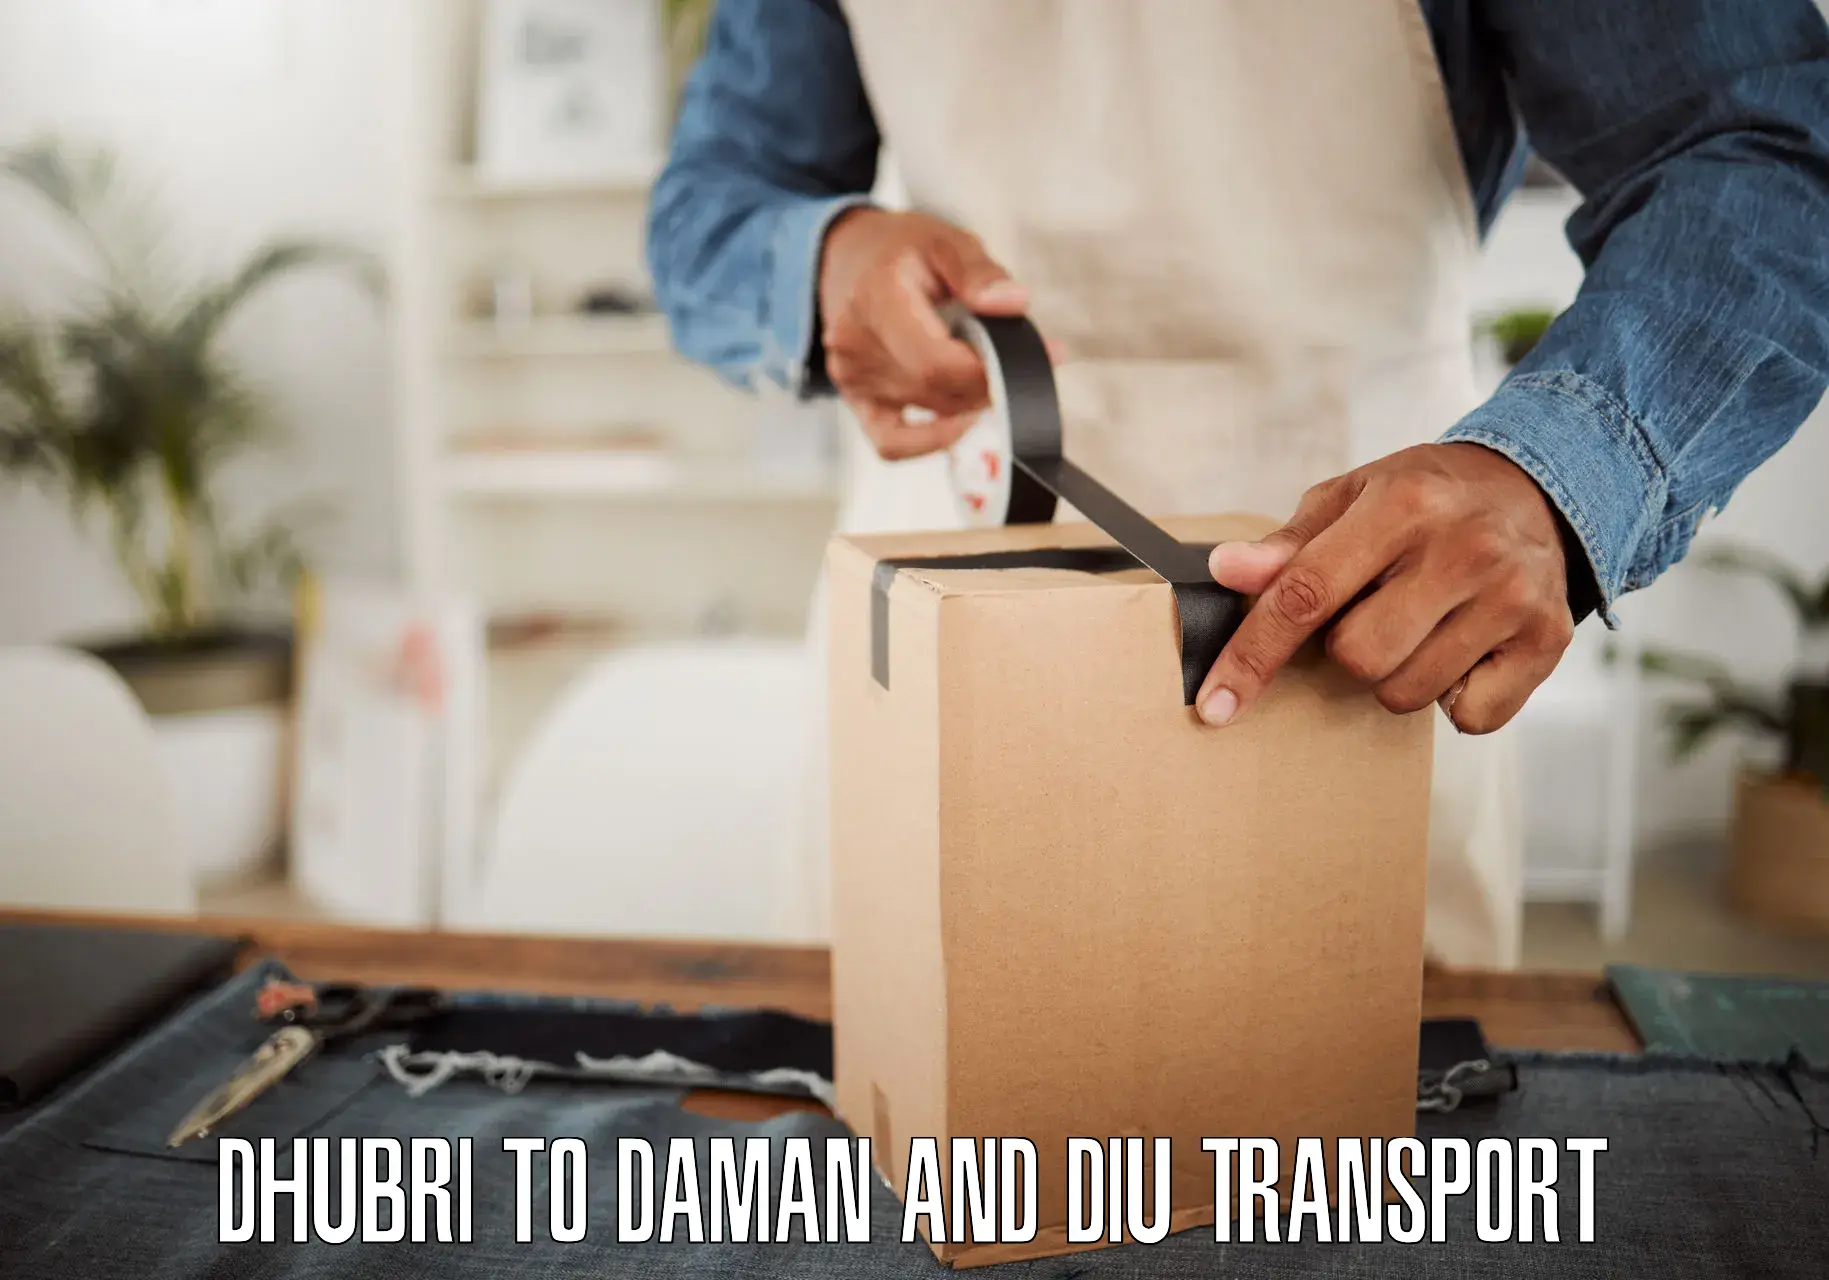 Goods delivery service Dhubri to Daman and Diu